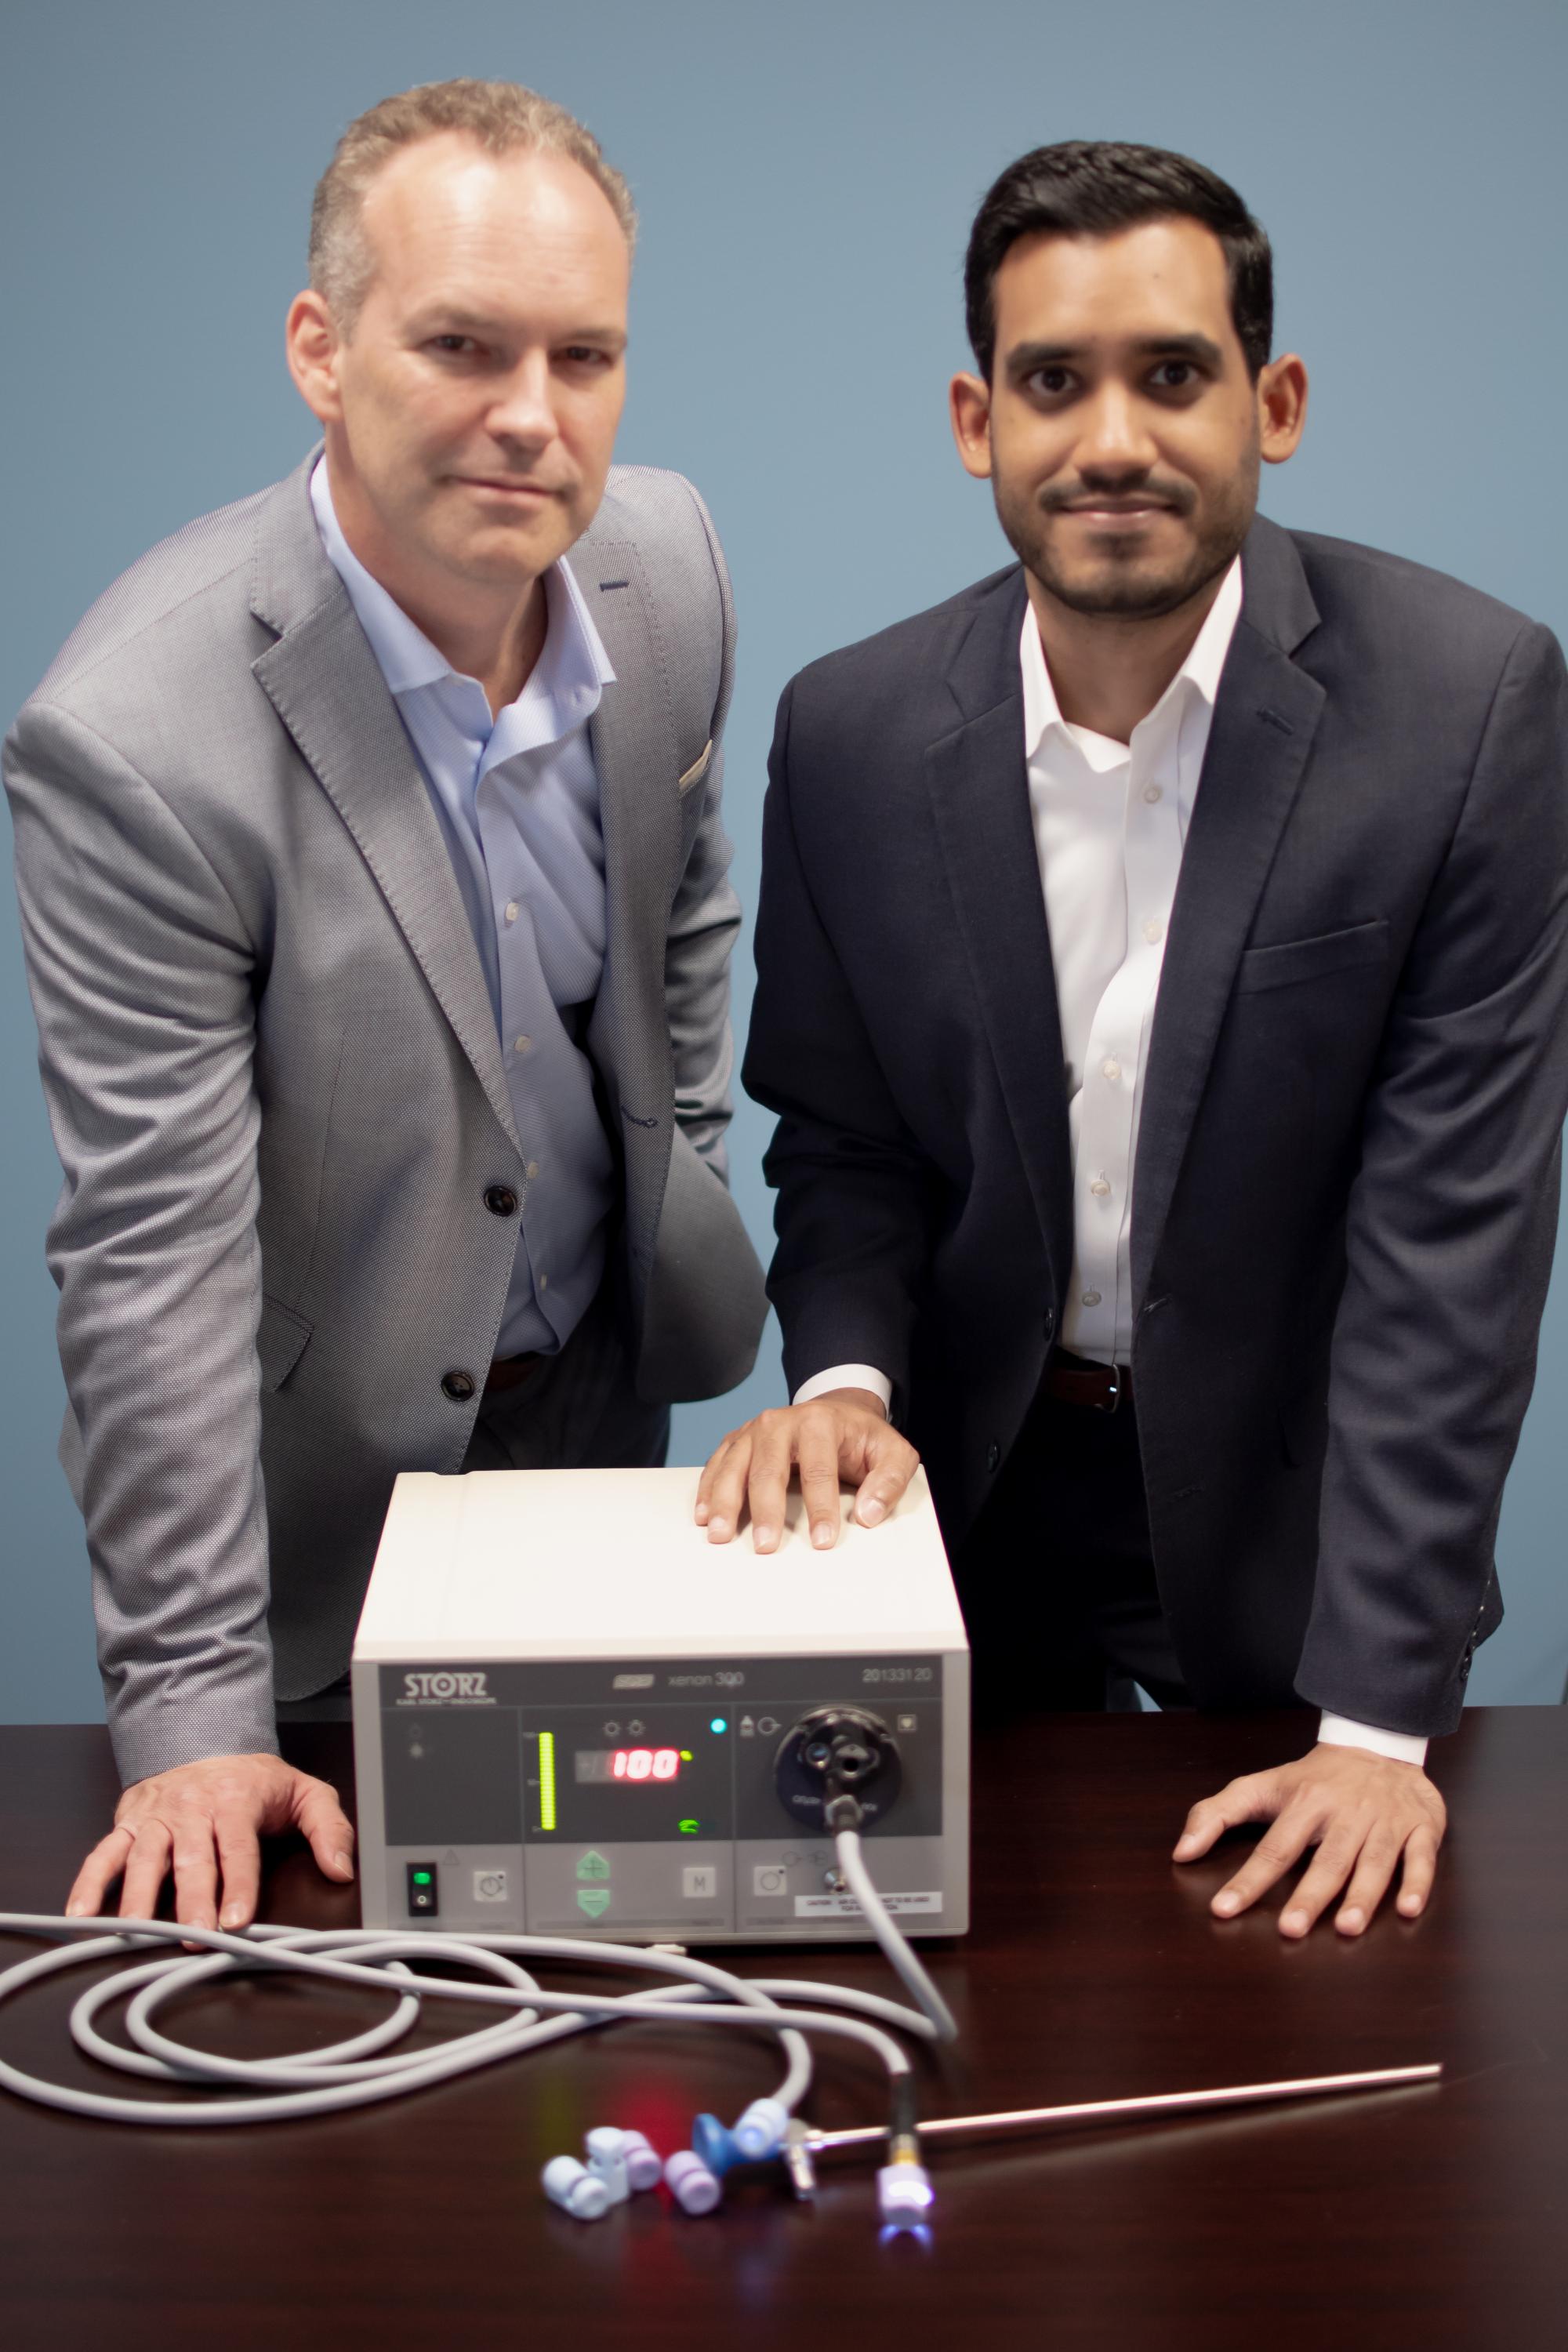 Jackson Medical co-founders, CEO James Rains, a professor in the Wallace H. Coulter Department of Biomedical Engineering at Georgia Tech and Emory University (left), and Kamil Makhnejia, chief operating officer. (Photo: Péralte C. Paul)